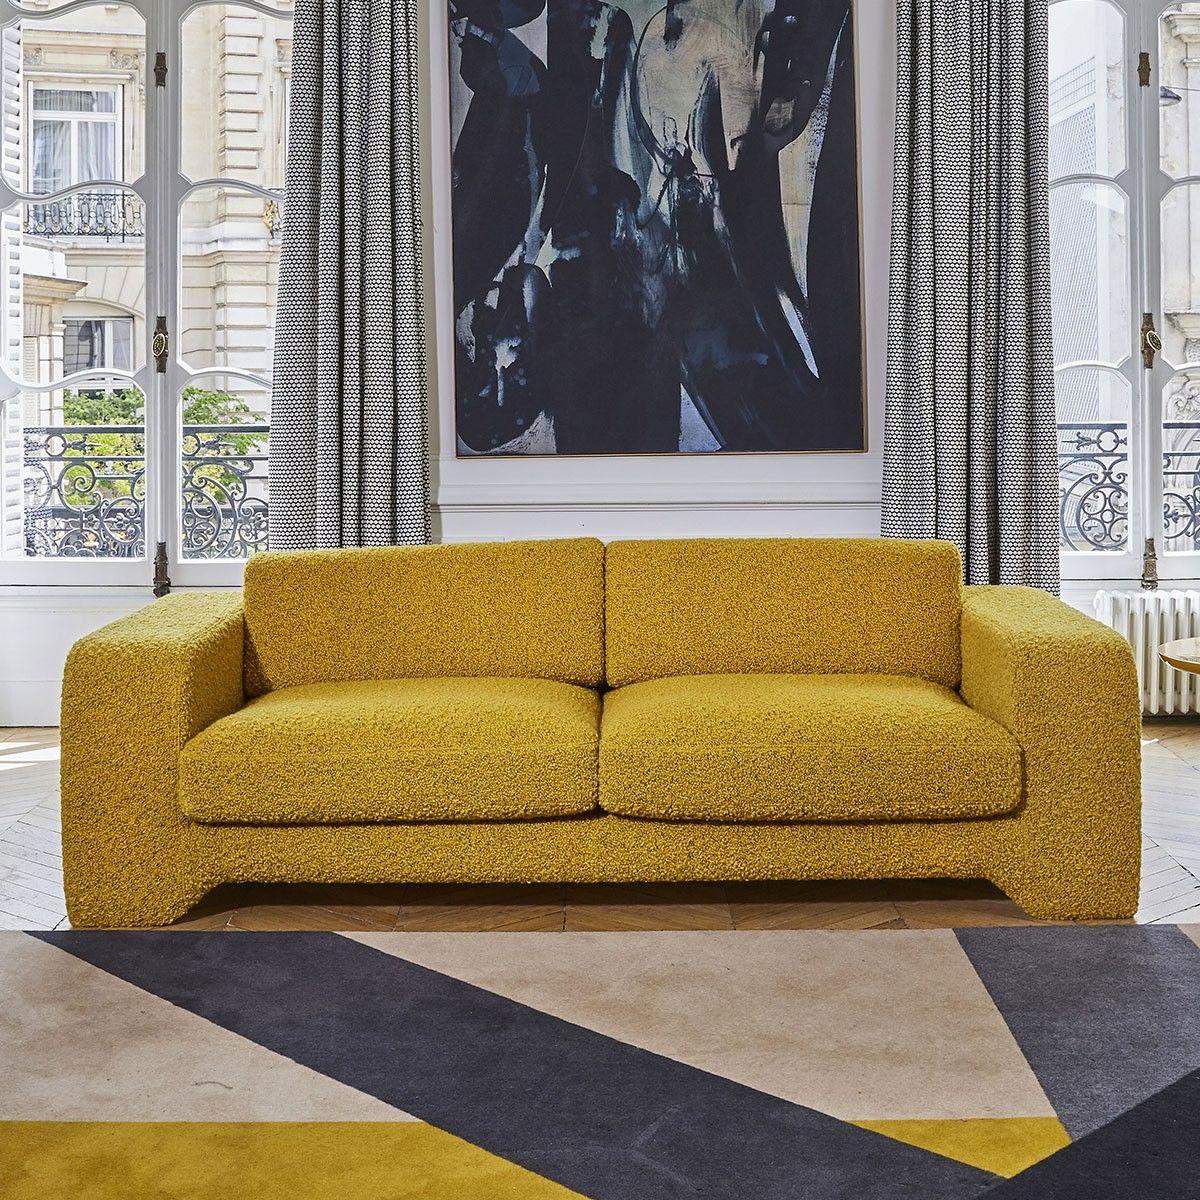 Popus Editions Giovanna 3 seater sofa in Oil Petrol Como Velvet Upholstery

Giovanna is a sofa with a strong profile. A sober, plush line, with this famous detail that changes everything, so as not to forget its strength of character and this